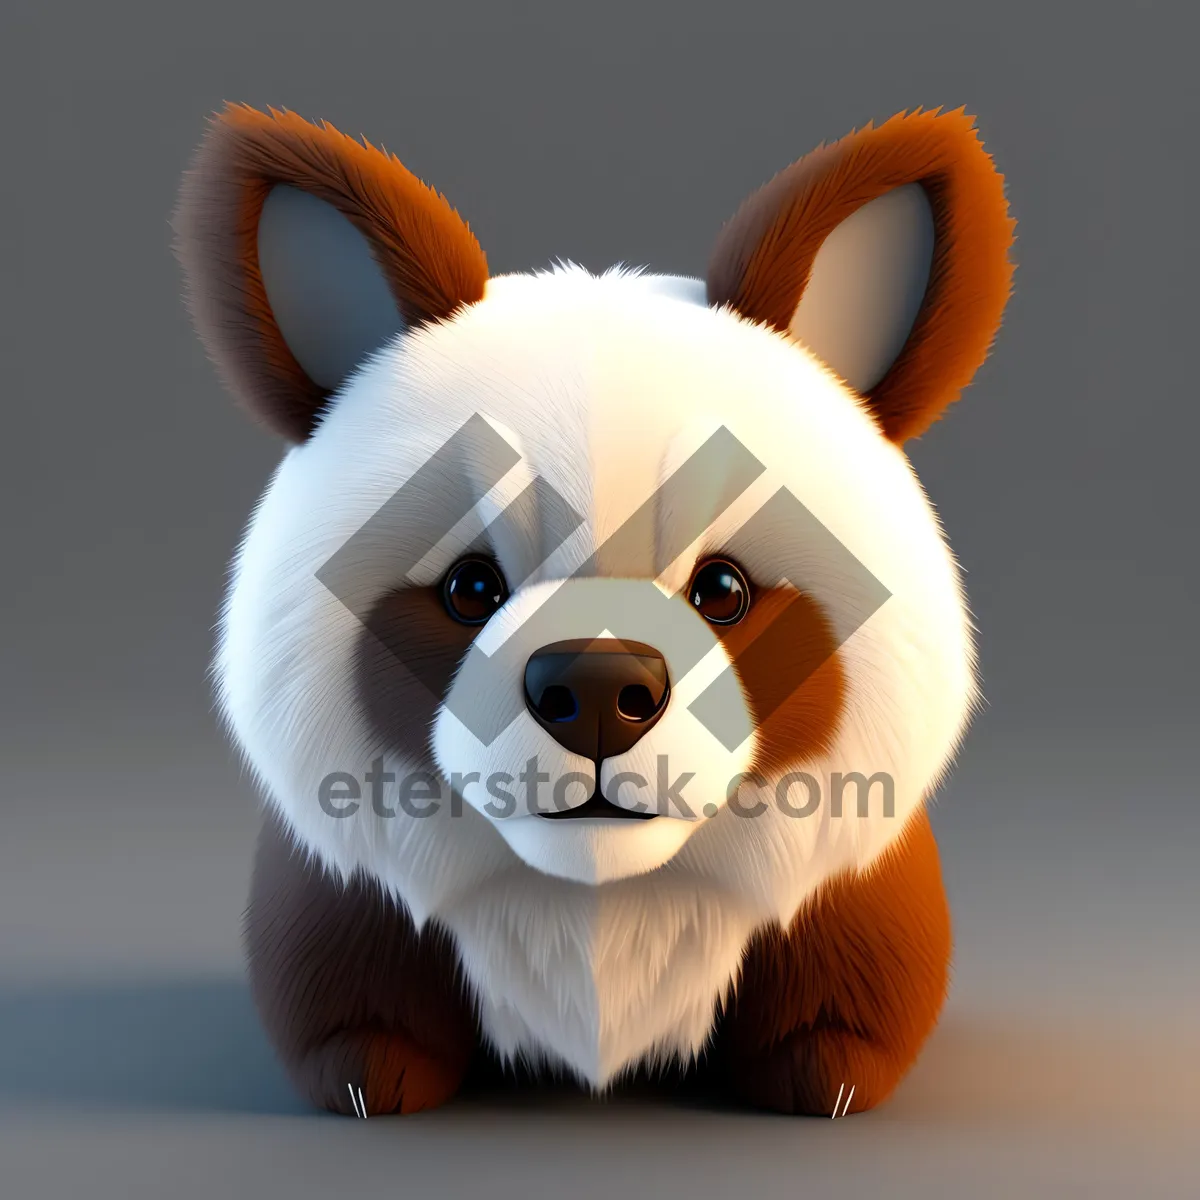 Picture of Cute Teddy Bear Piggy Bank Toy